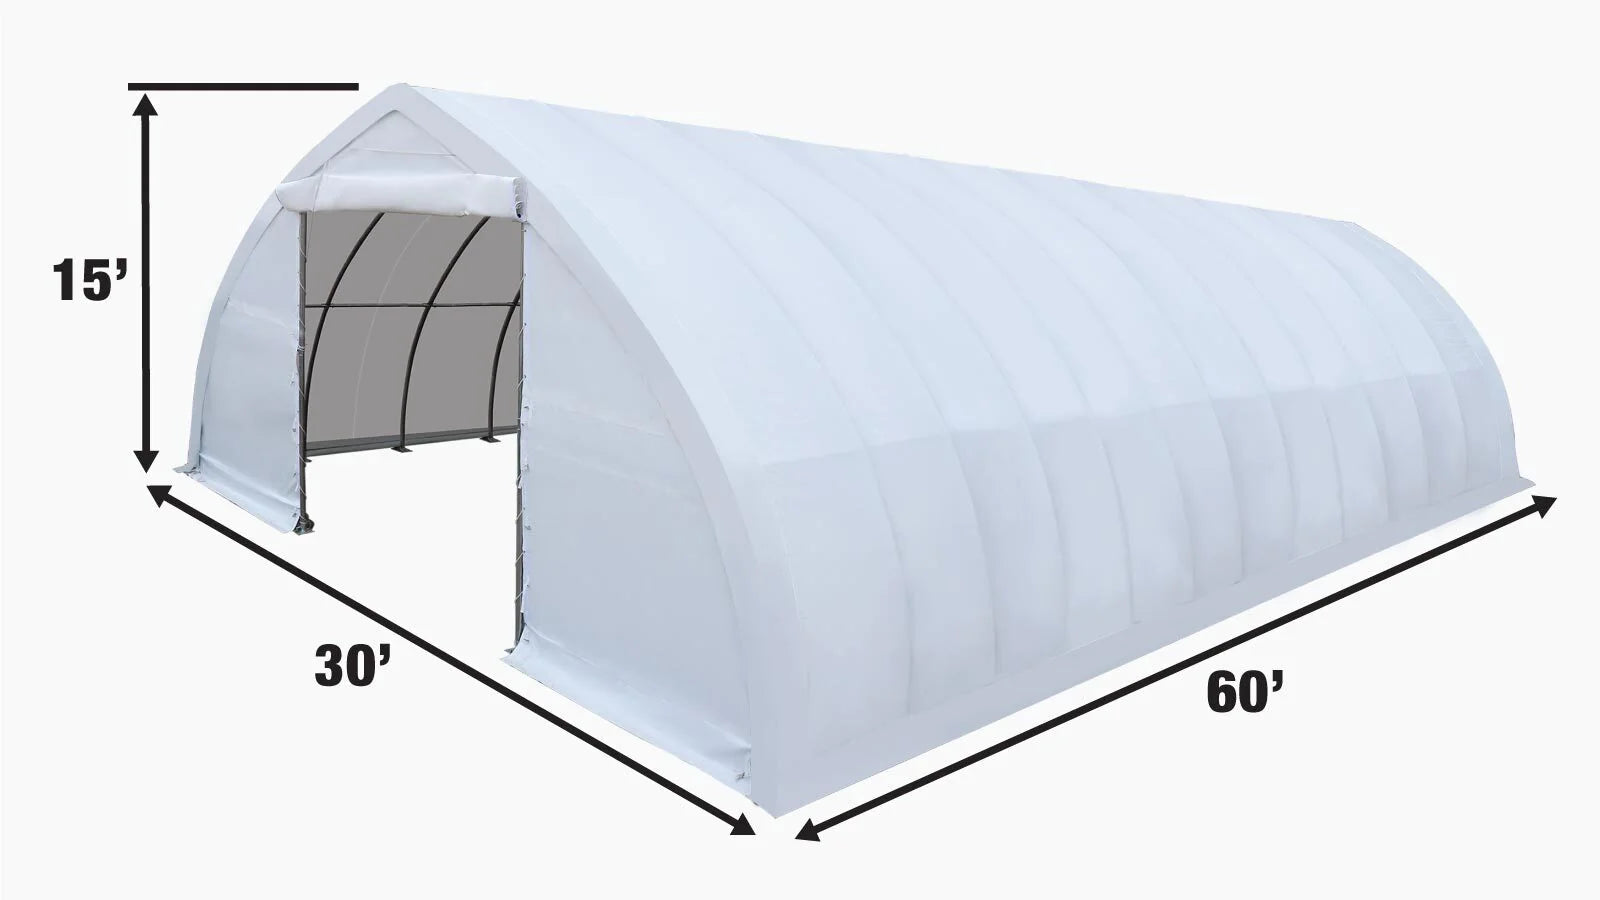 TMG Industrial 30' x 60' Peak Ceiling Storage Shelter with Heavy Duty 11 oz PE Cover & Drive Through Doors, TMG-ST3060E(Previously ST3060)-specifications-image